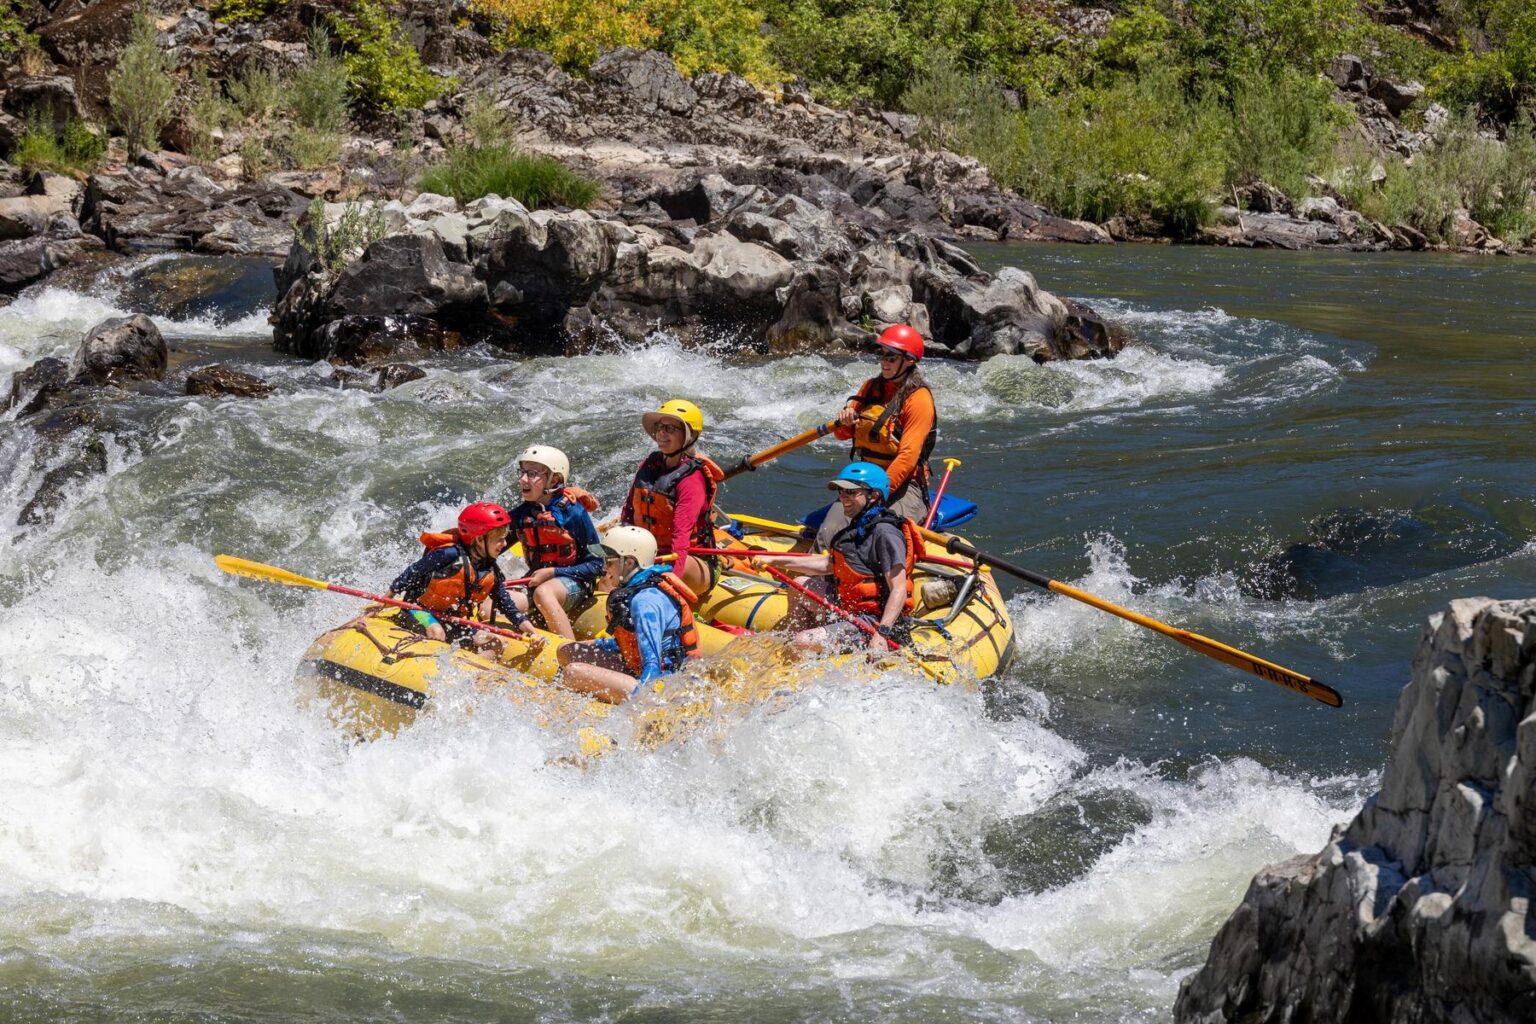 A raft full of people splashing through a rapid on Oregon's Rogue River